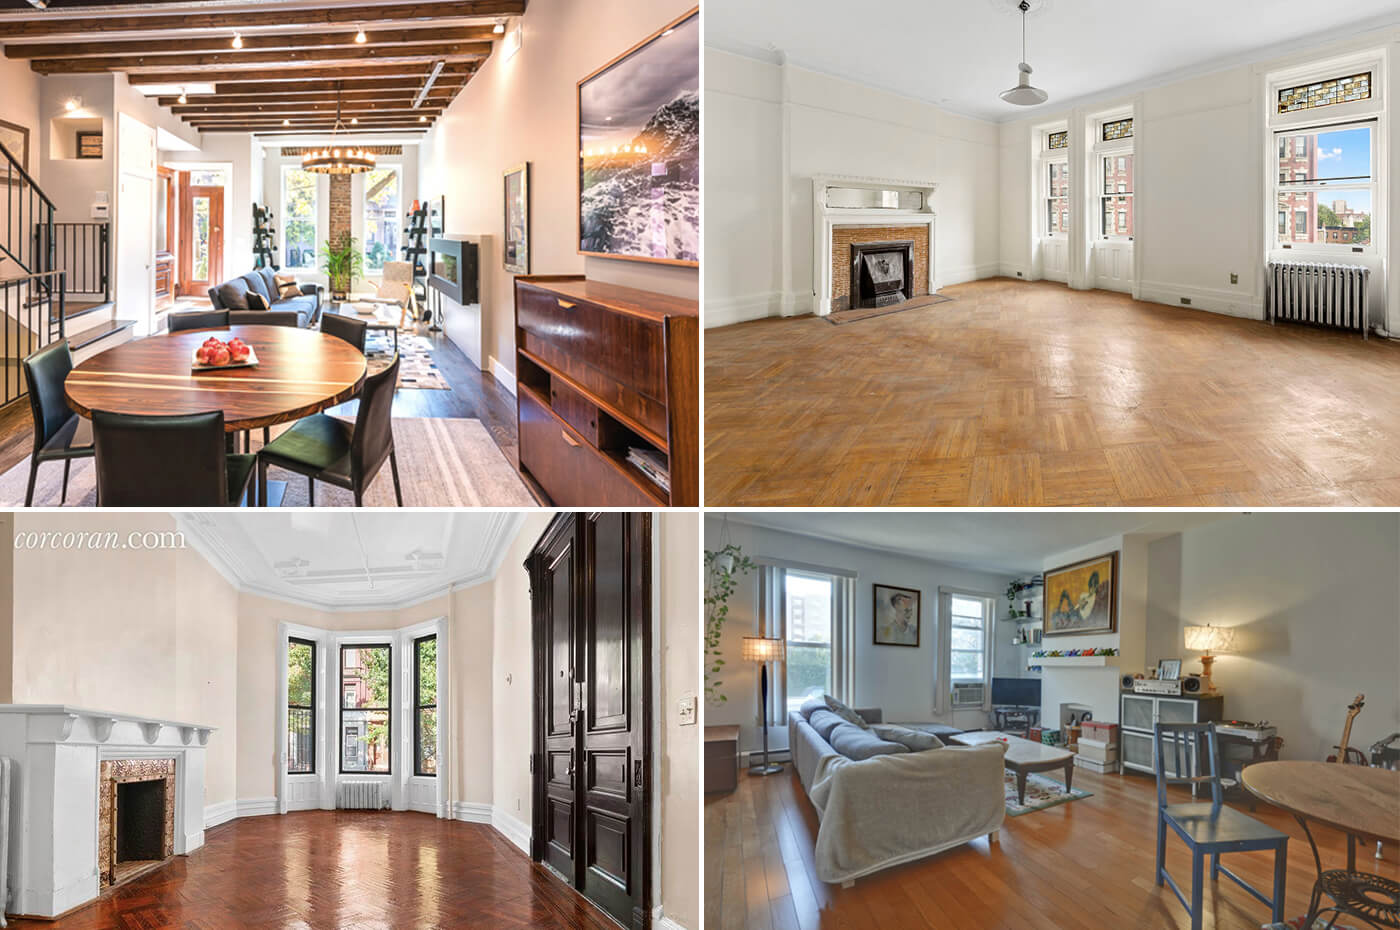 Brooklyn Homes for Sale in Greenwood Heights, Bed Stuy, Clinton Hill, Park Slope